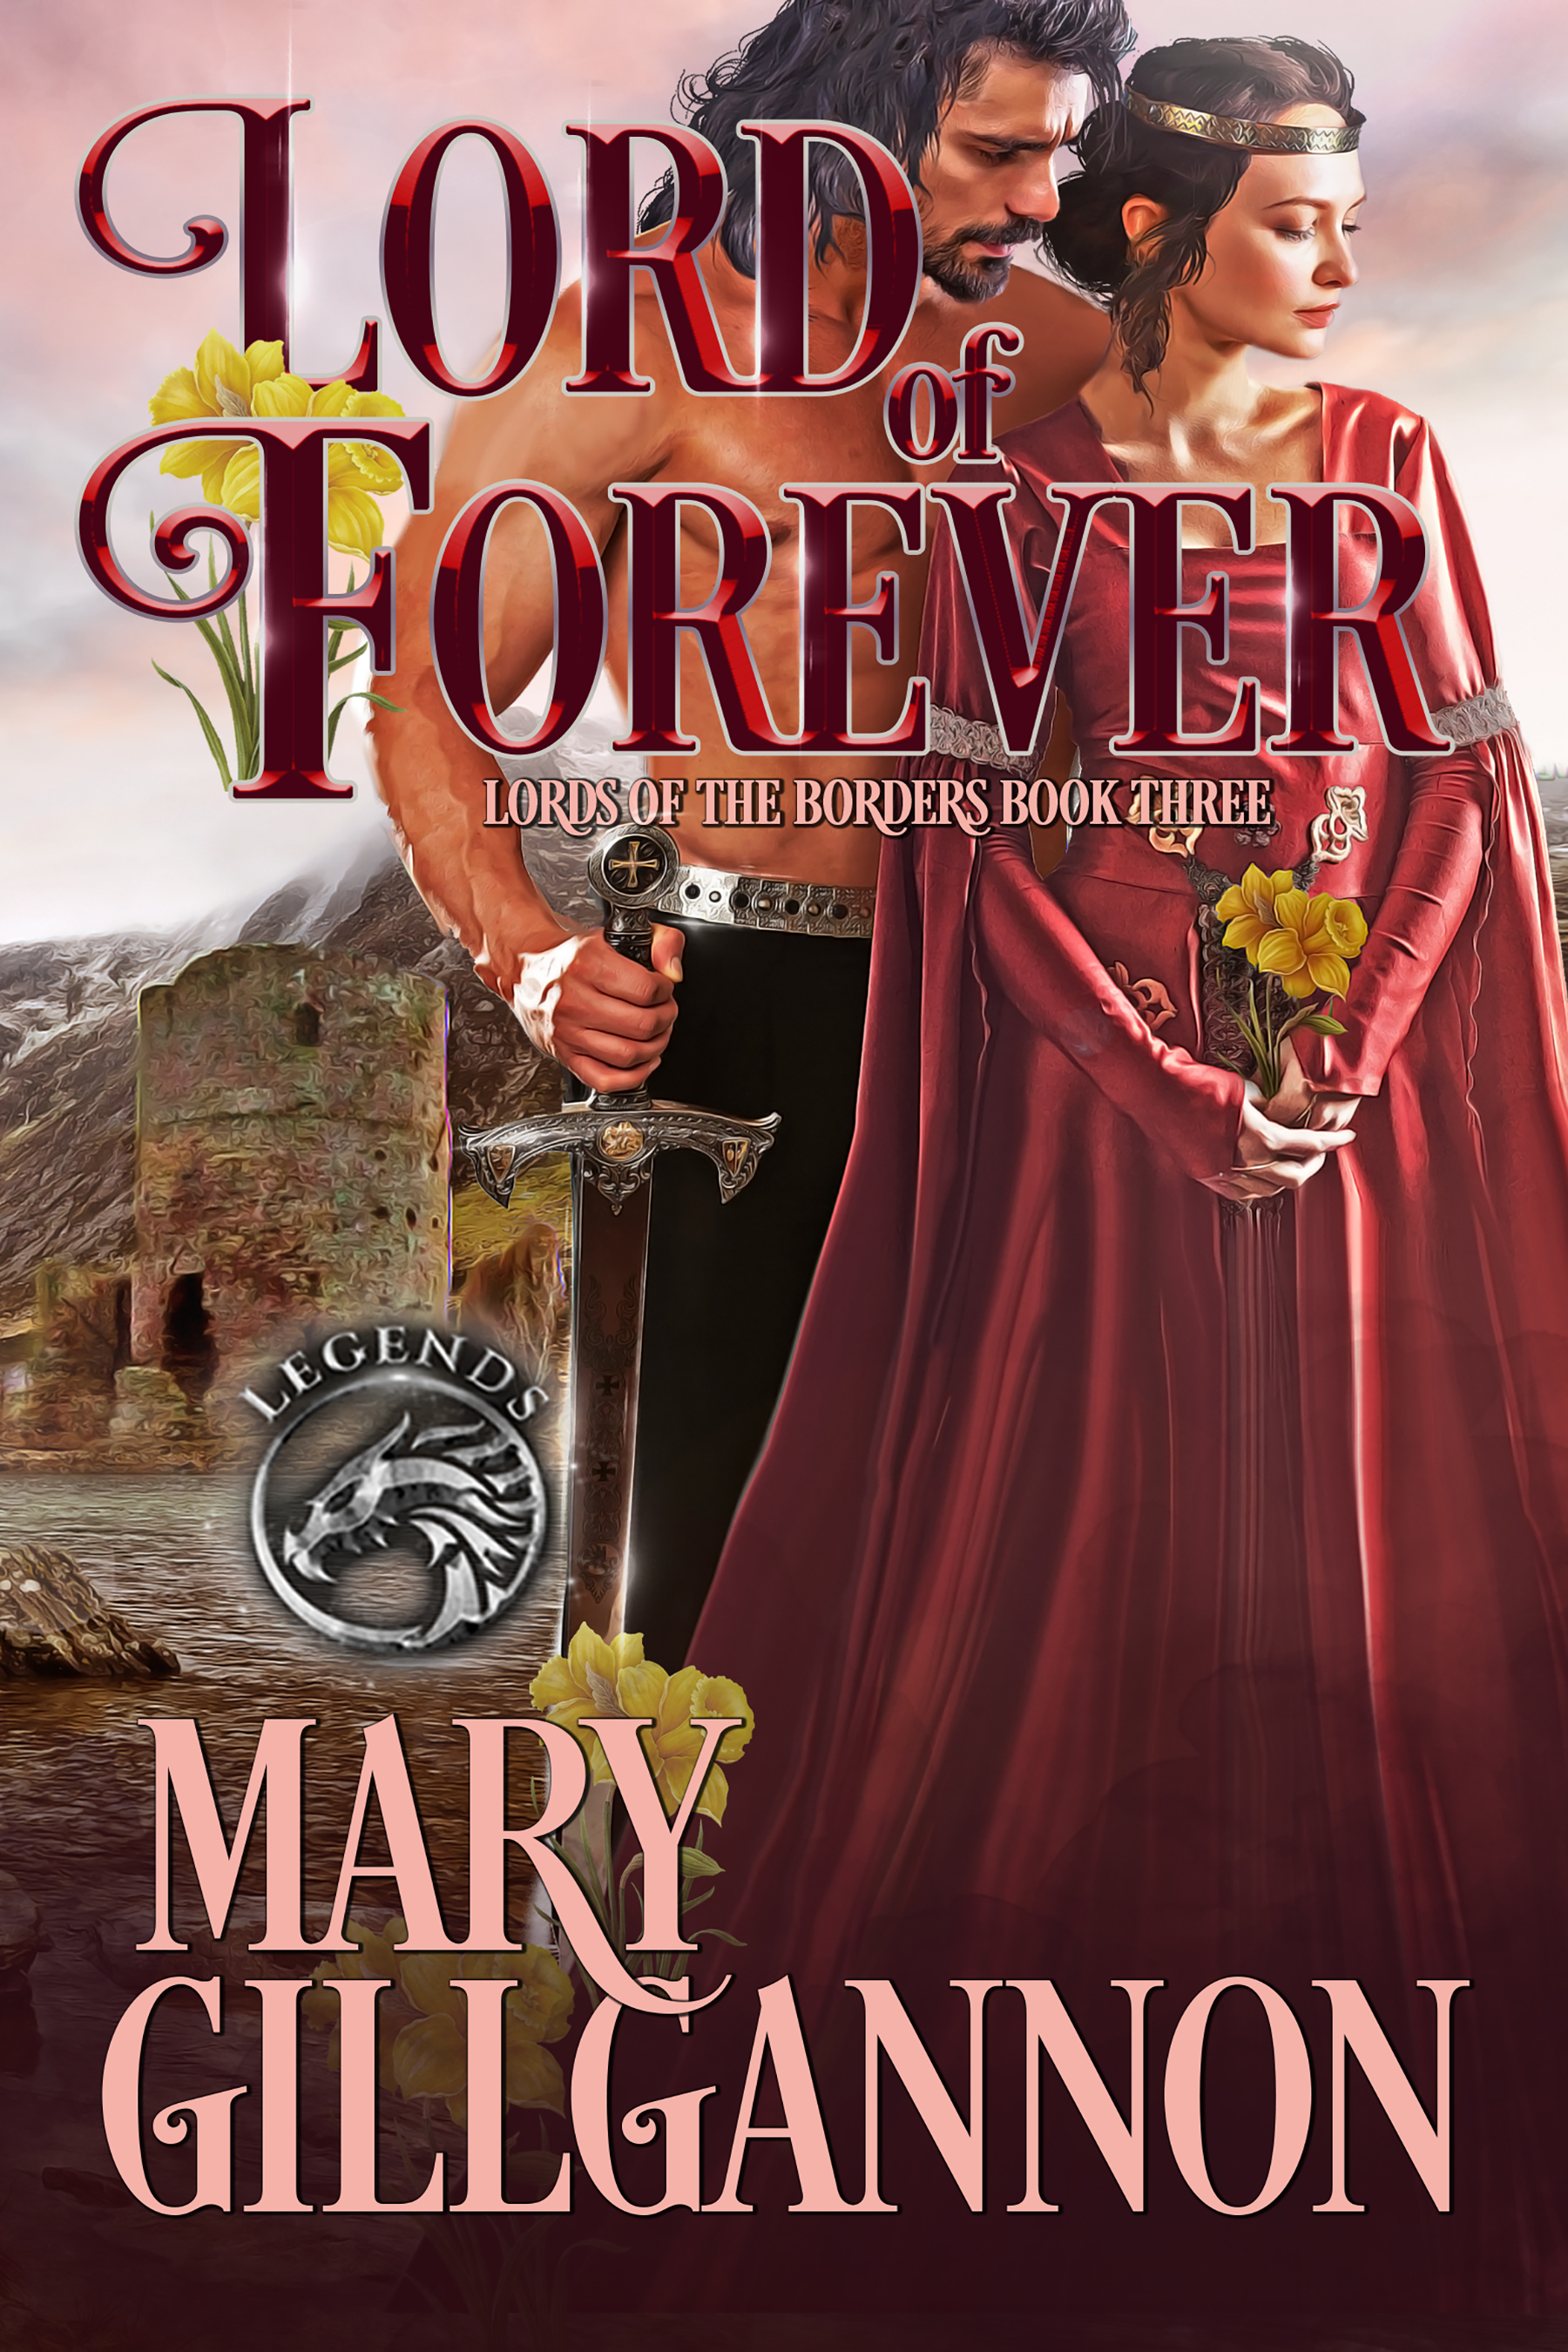 Lord of Forever (Lords of the Borders Book 3)